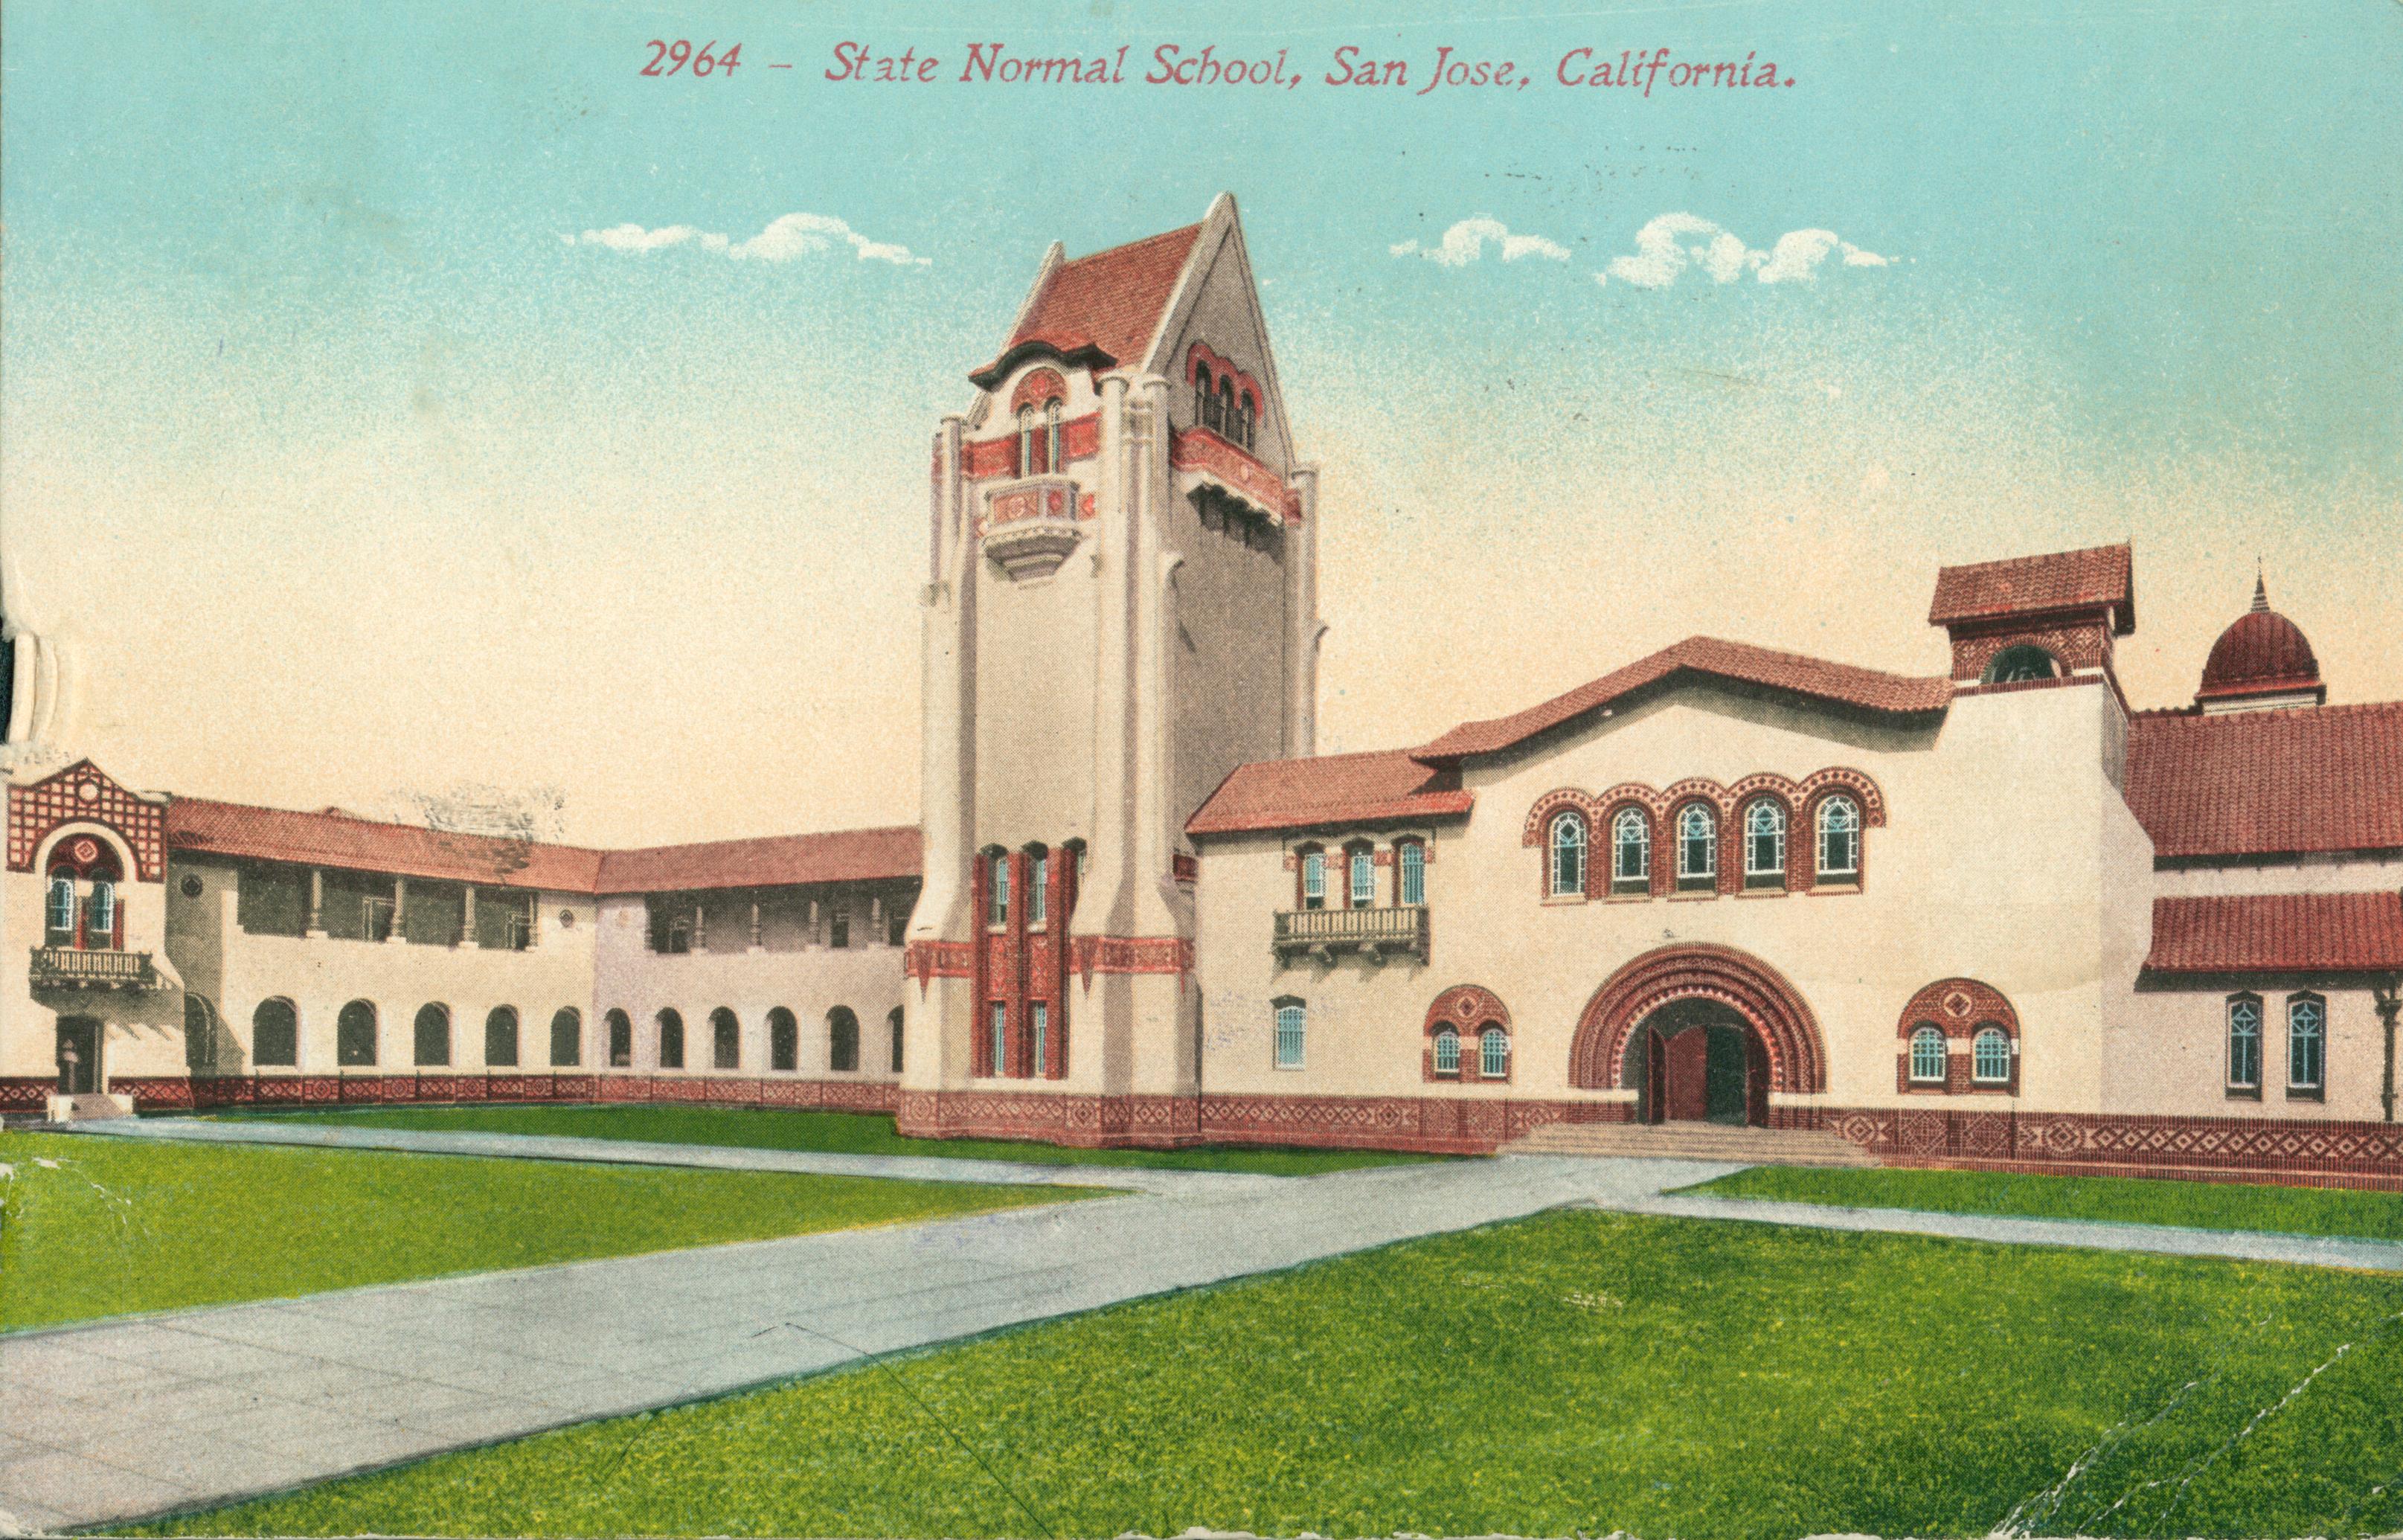 Shows the exterior of the State Normal School